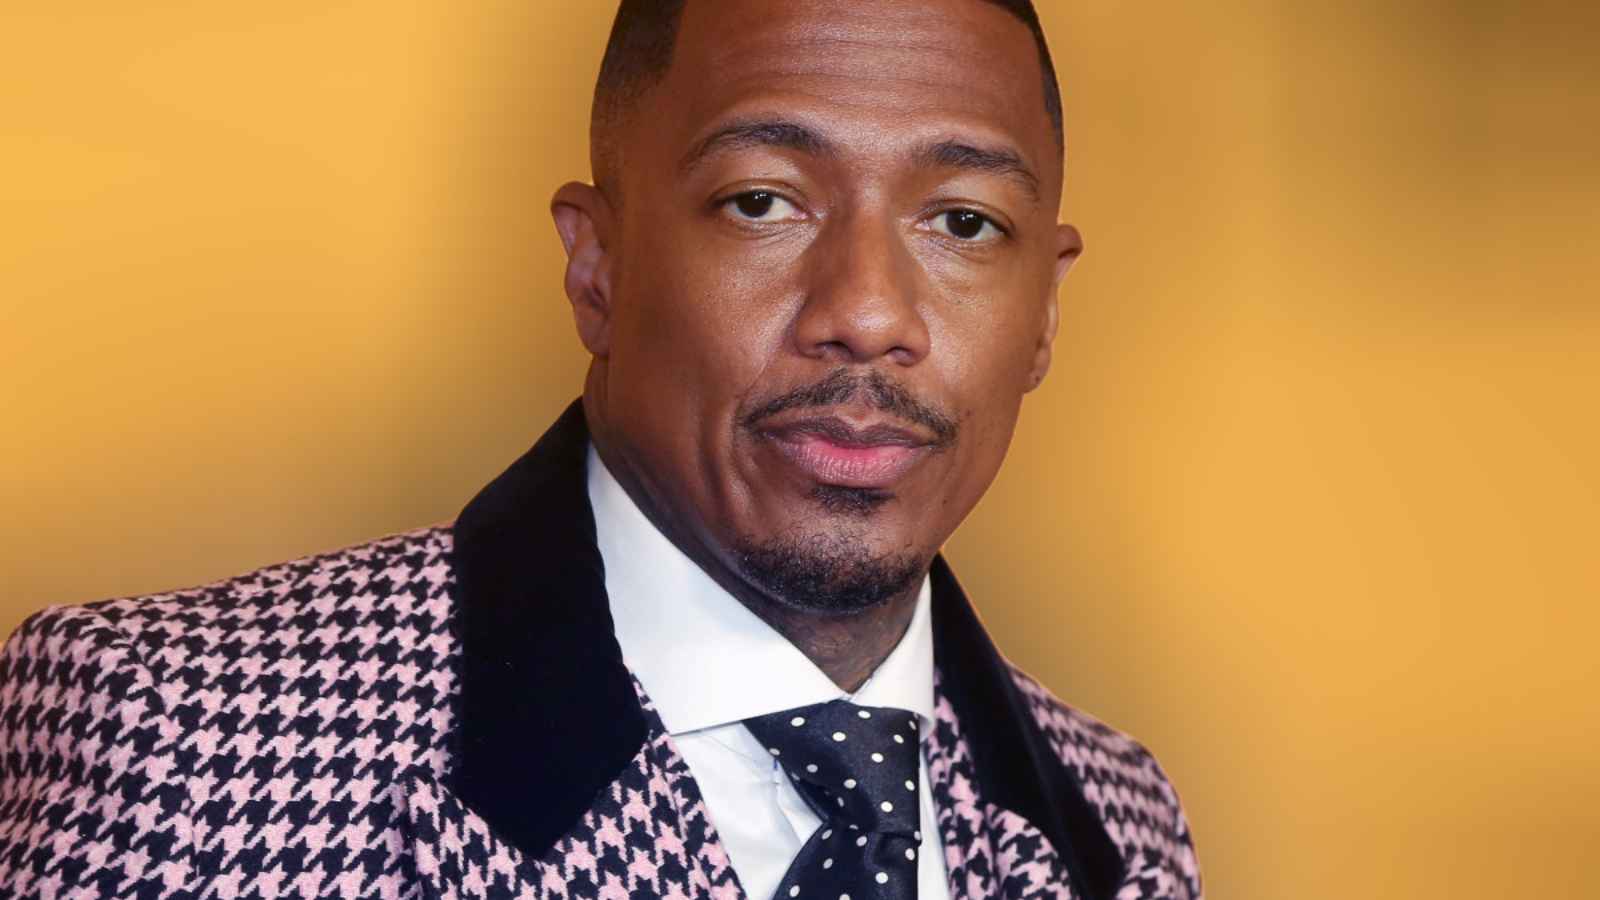 Nick Cannon Biography: Age, Height, Wife, Kids, Career, Movies, Net Worth